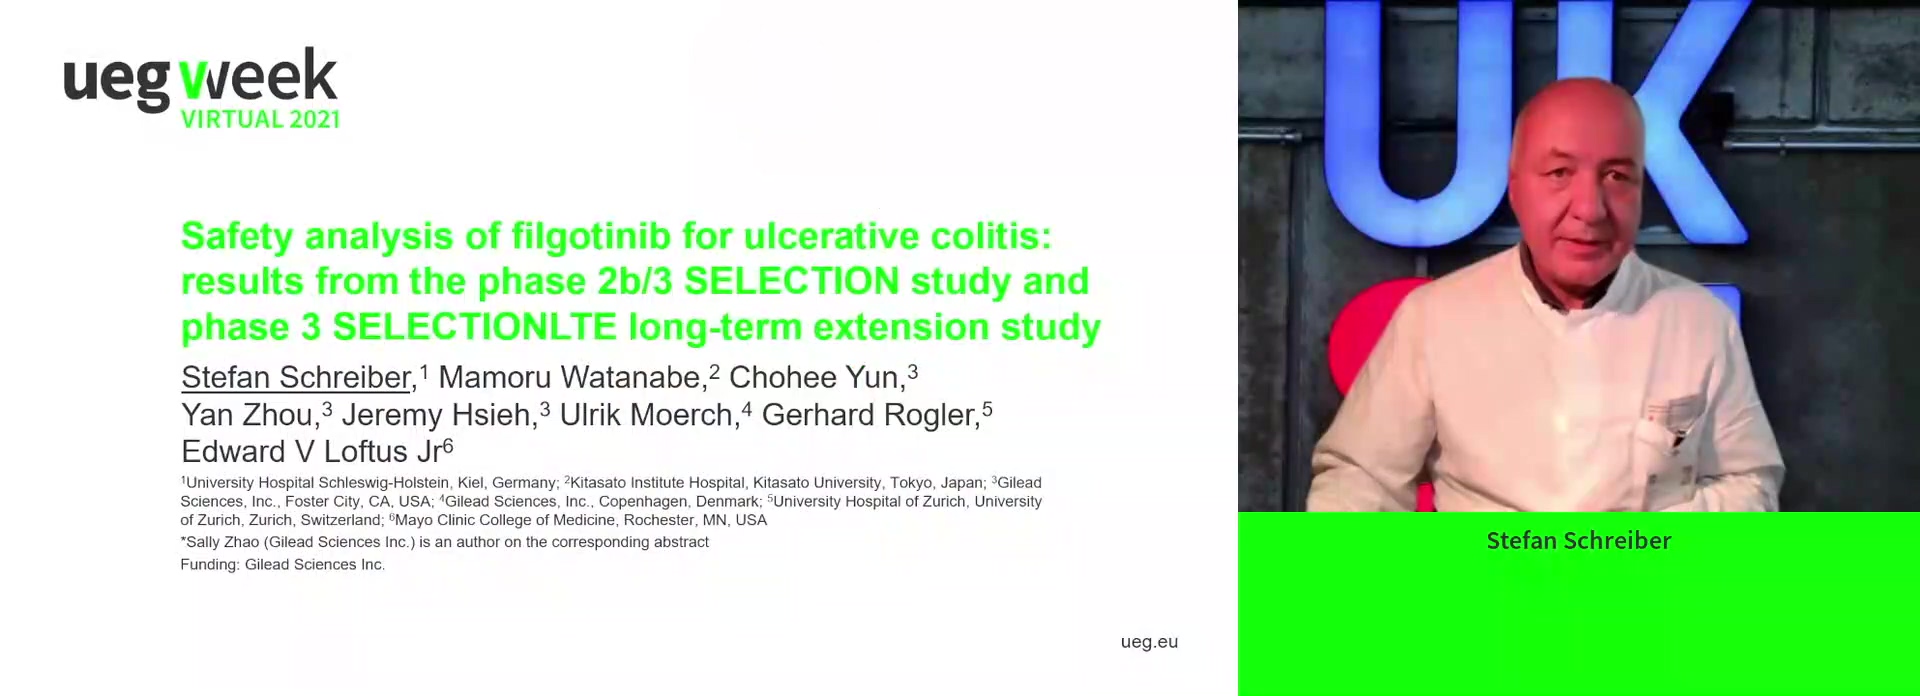 SAFETY ANALYSIS OF FILGOTINIB FOR ULCERATIVE COLITIS: RESULTS FROM THE PHASE 2B/3 SELECTION STUDY AND PHASE 3 SELECTION LTE LONG-TERM EXTENSION STUDY